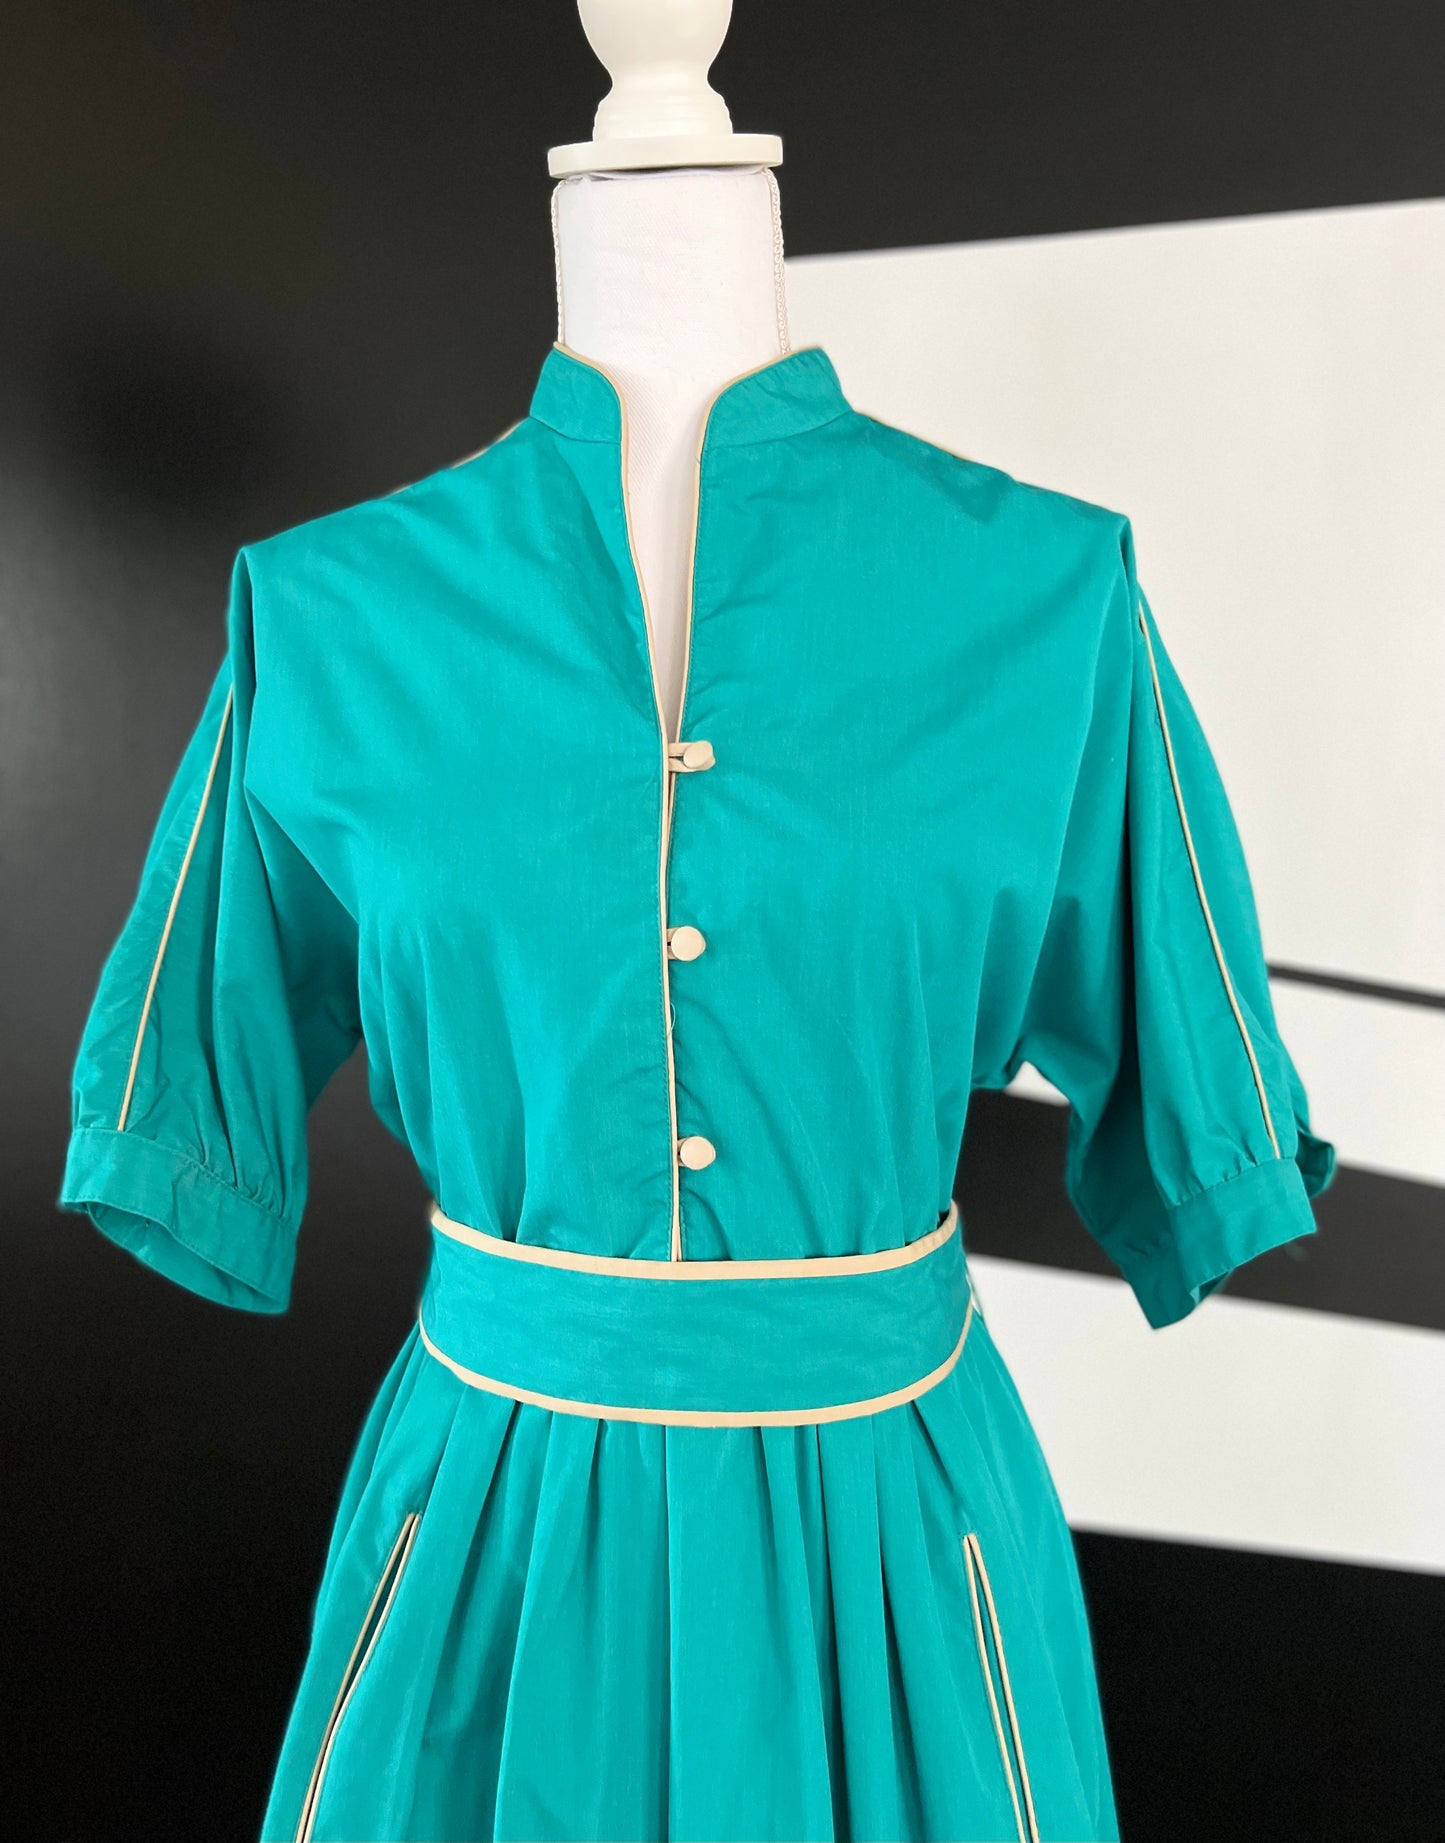 Vintage green dress with short sleeves and full skirt